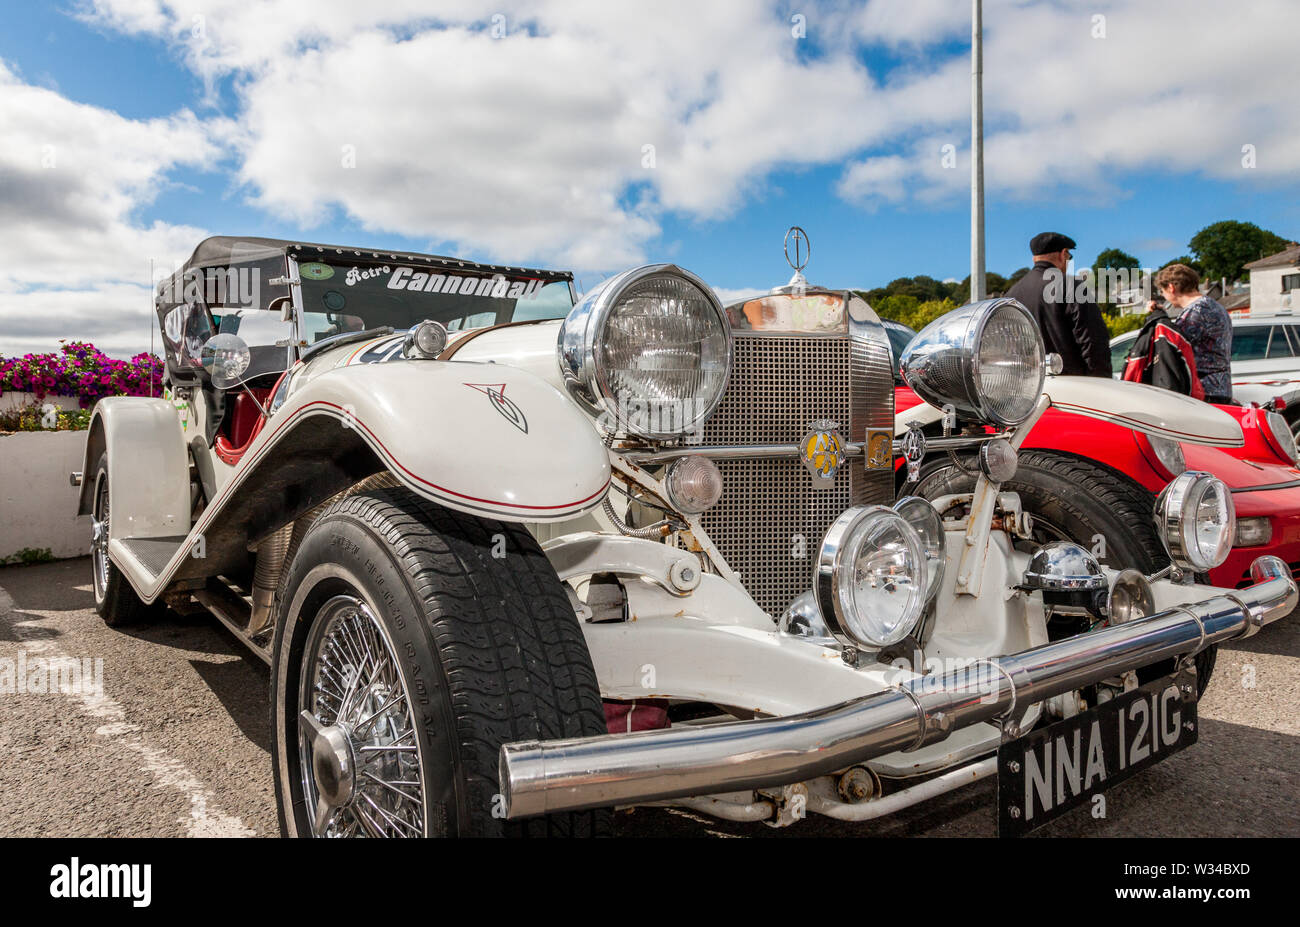 Kinsale, Cork, Ireland. 12th July, 2019. American built Excalibur car at the starting line of the Cannononball Retro Road Trip in Kinsale, Co. Cork, Ireland. The classic run starts in Kinsale and takes in Healy Pass, Kenmare, Molls Gap, Inch Beach, Dingle, Slea Head, Conor Pass, Tralee and finishes at Bunratty Castle on July 13th 2019. Credit: David Creedon/Alamy Live News Stock Photo